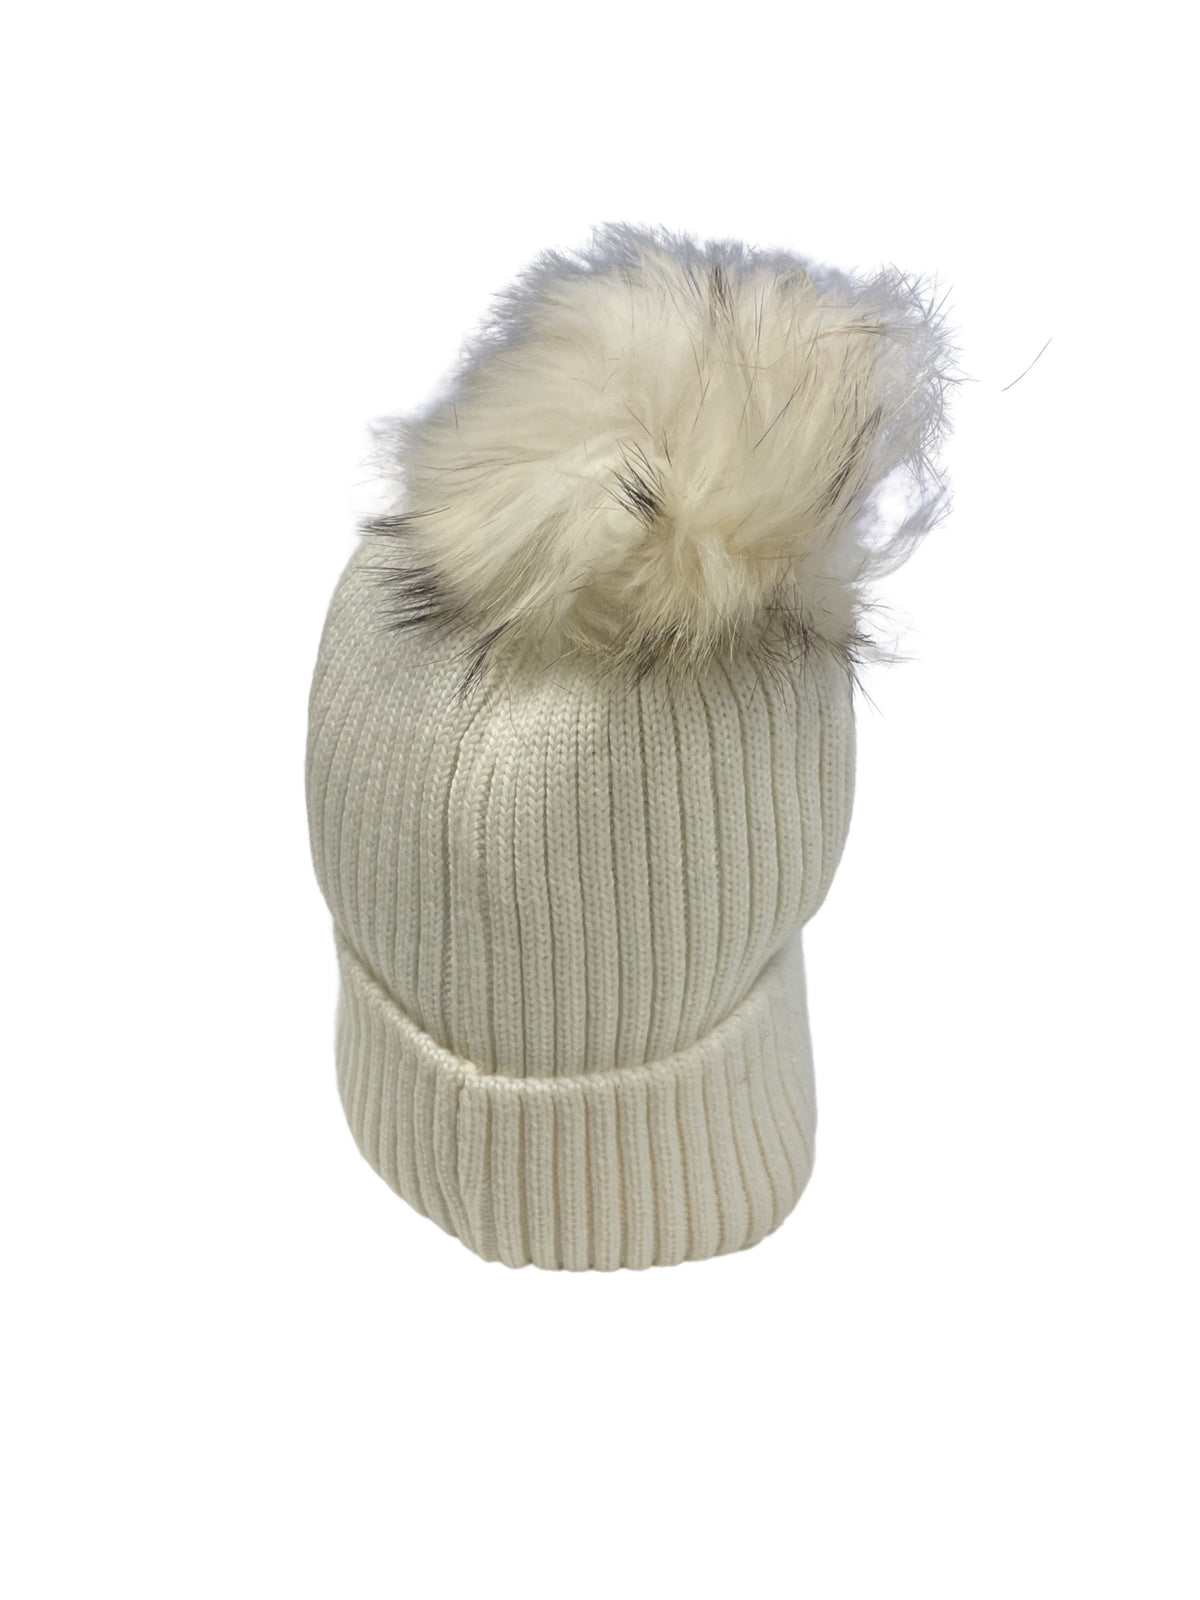 Knit Hat with Bauble in Cream